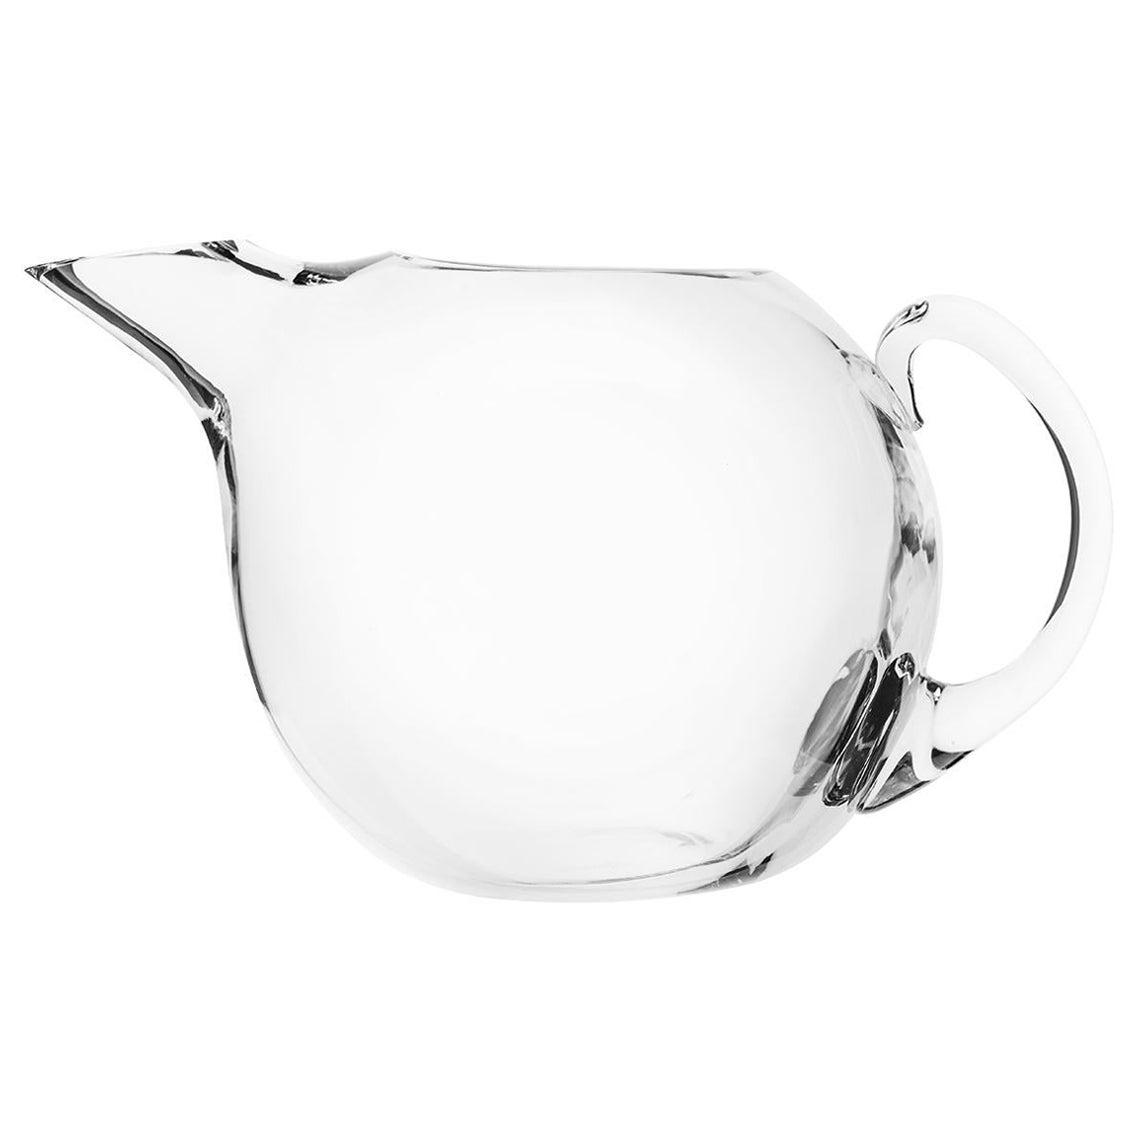 Orrefors Mingus Martini Pitcher For Sale